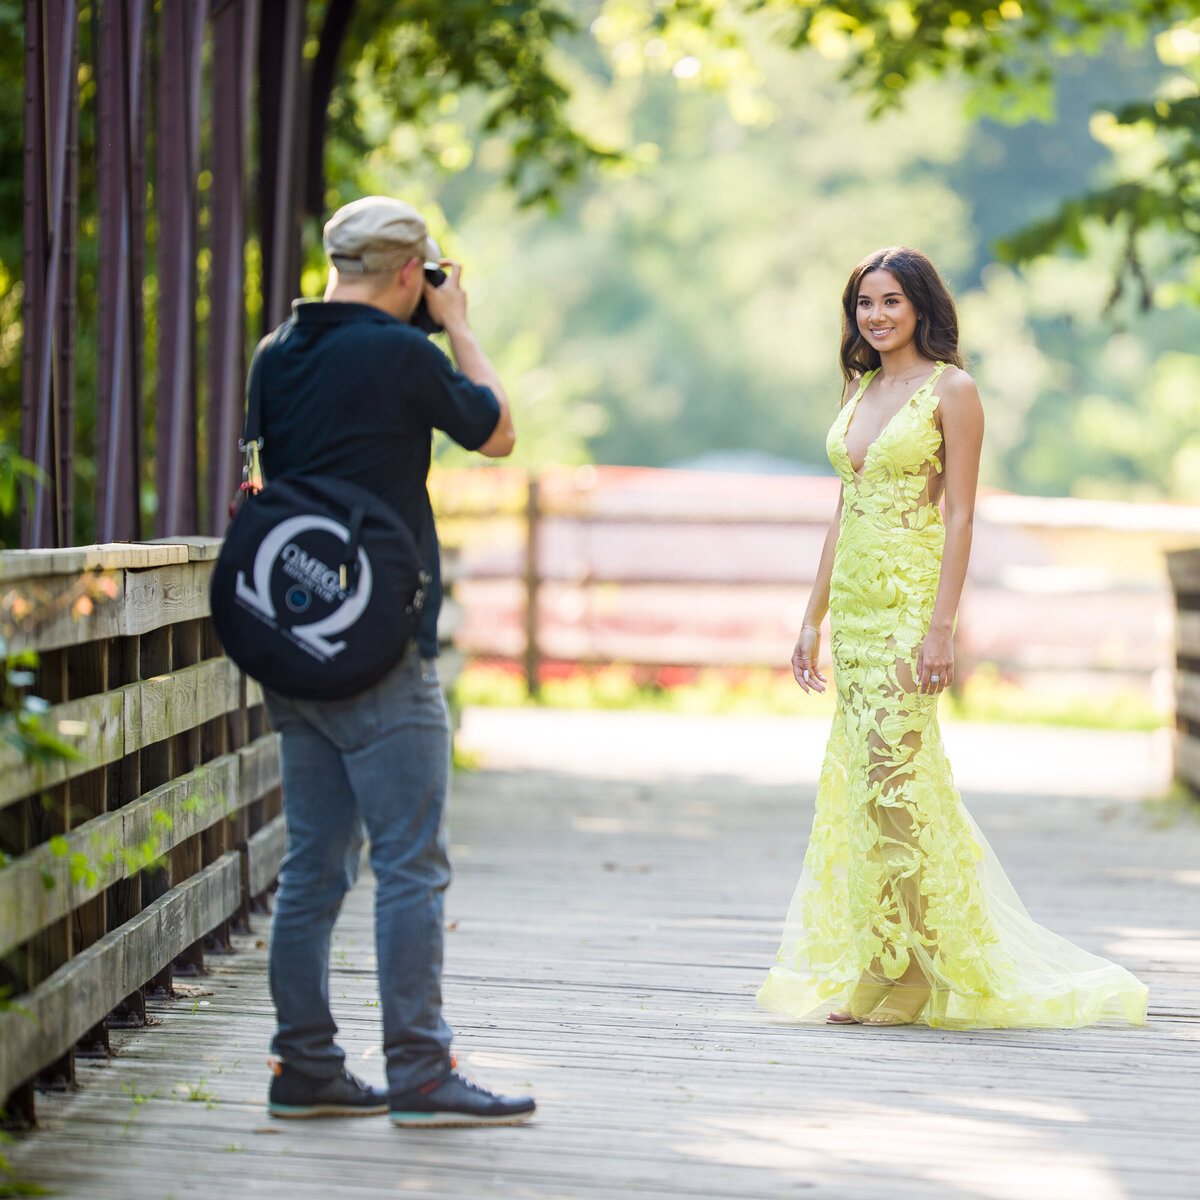 Behind the scenes in Phoenixville at a senior portrait session